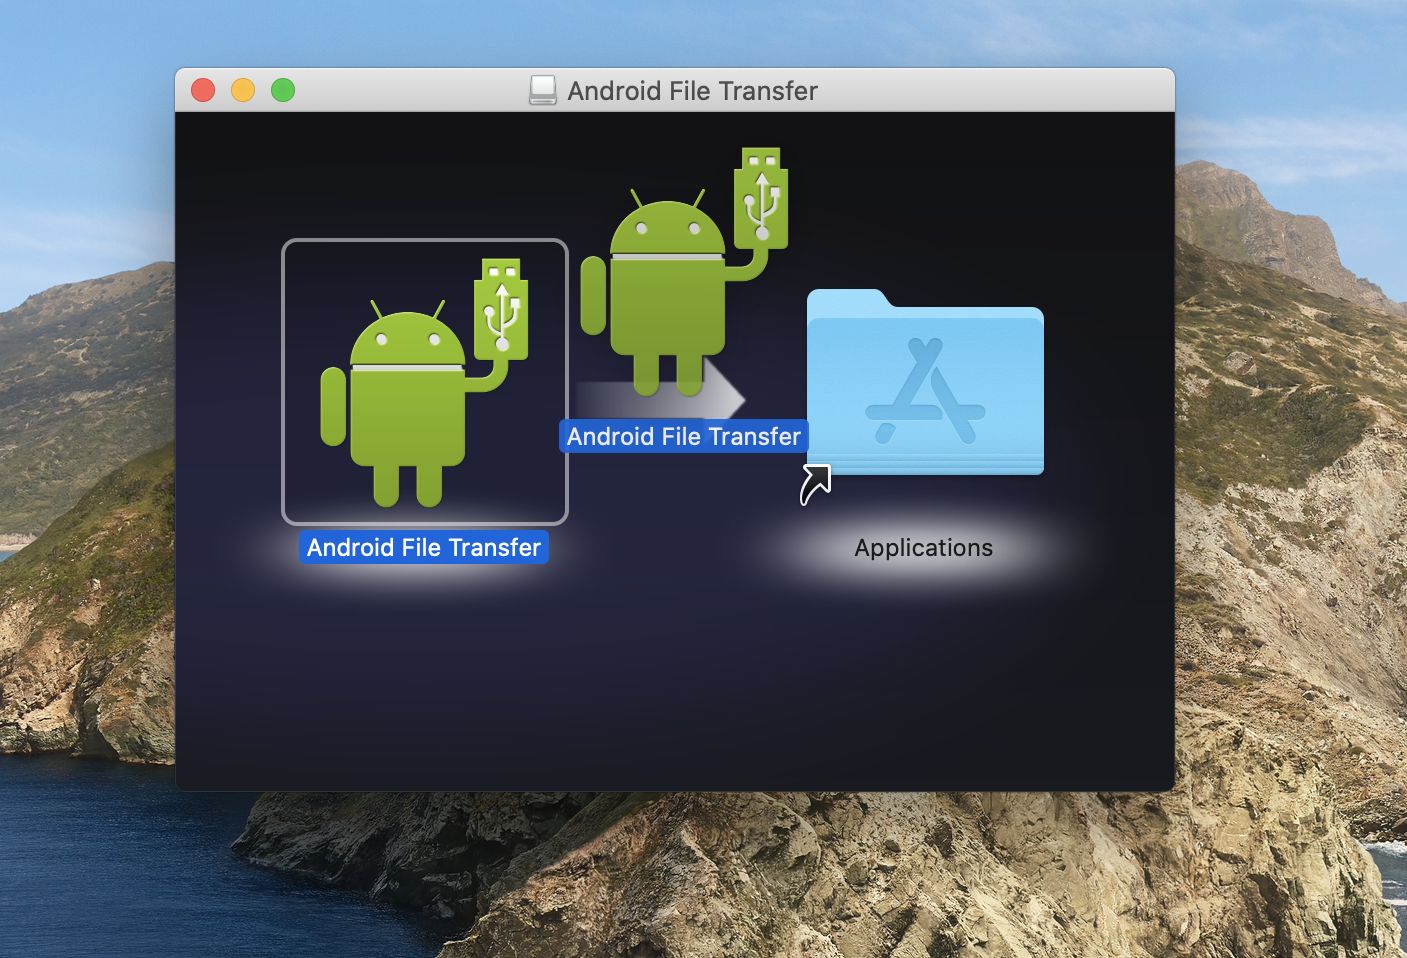 Android File Transfer for Mac - How to Transfer Android Files to Mac